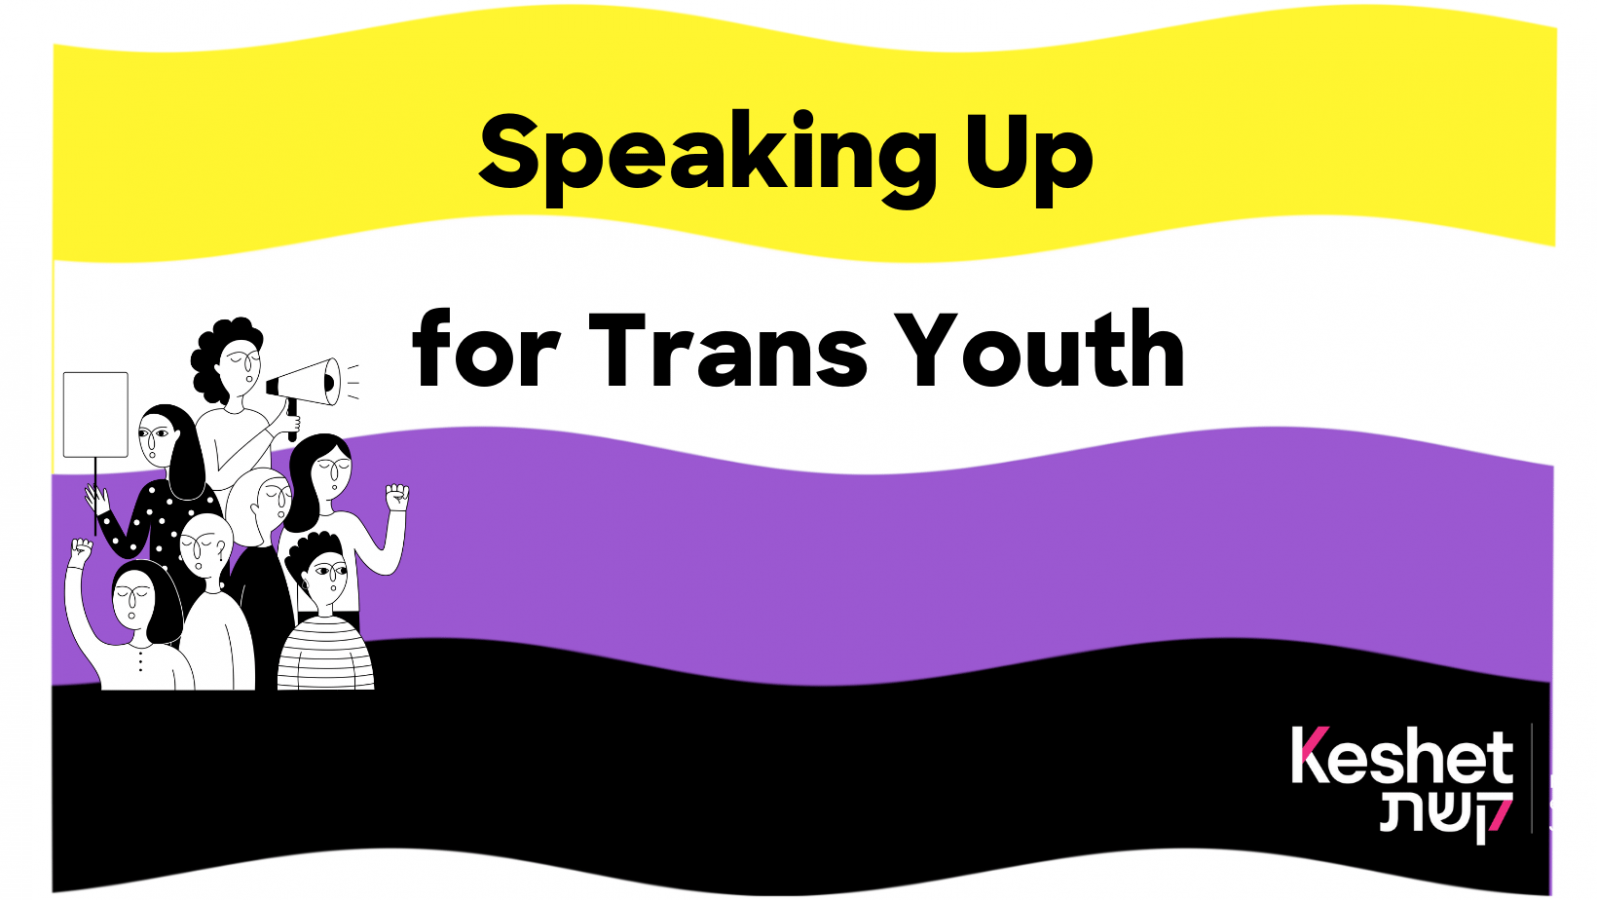 Speaking up for trans youth